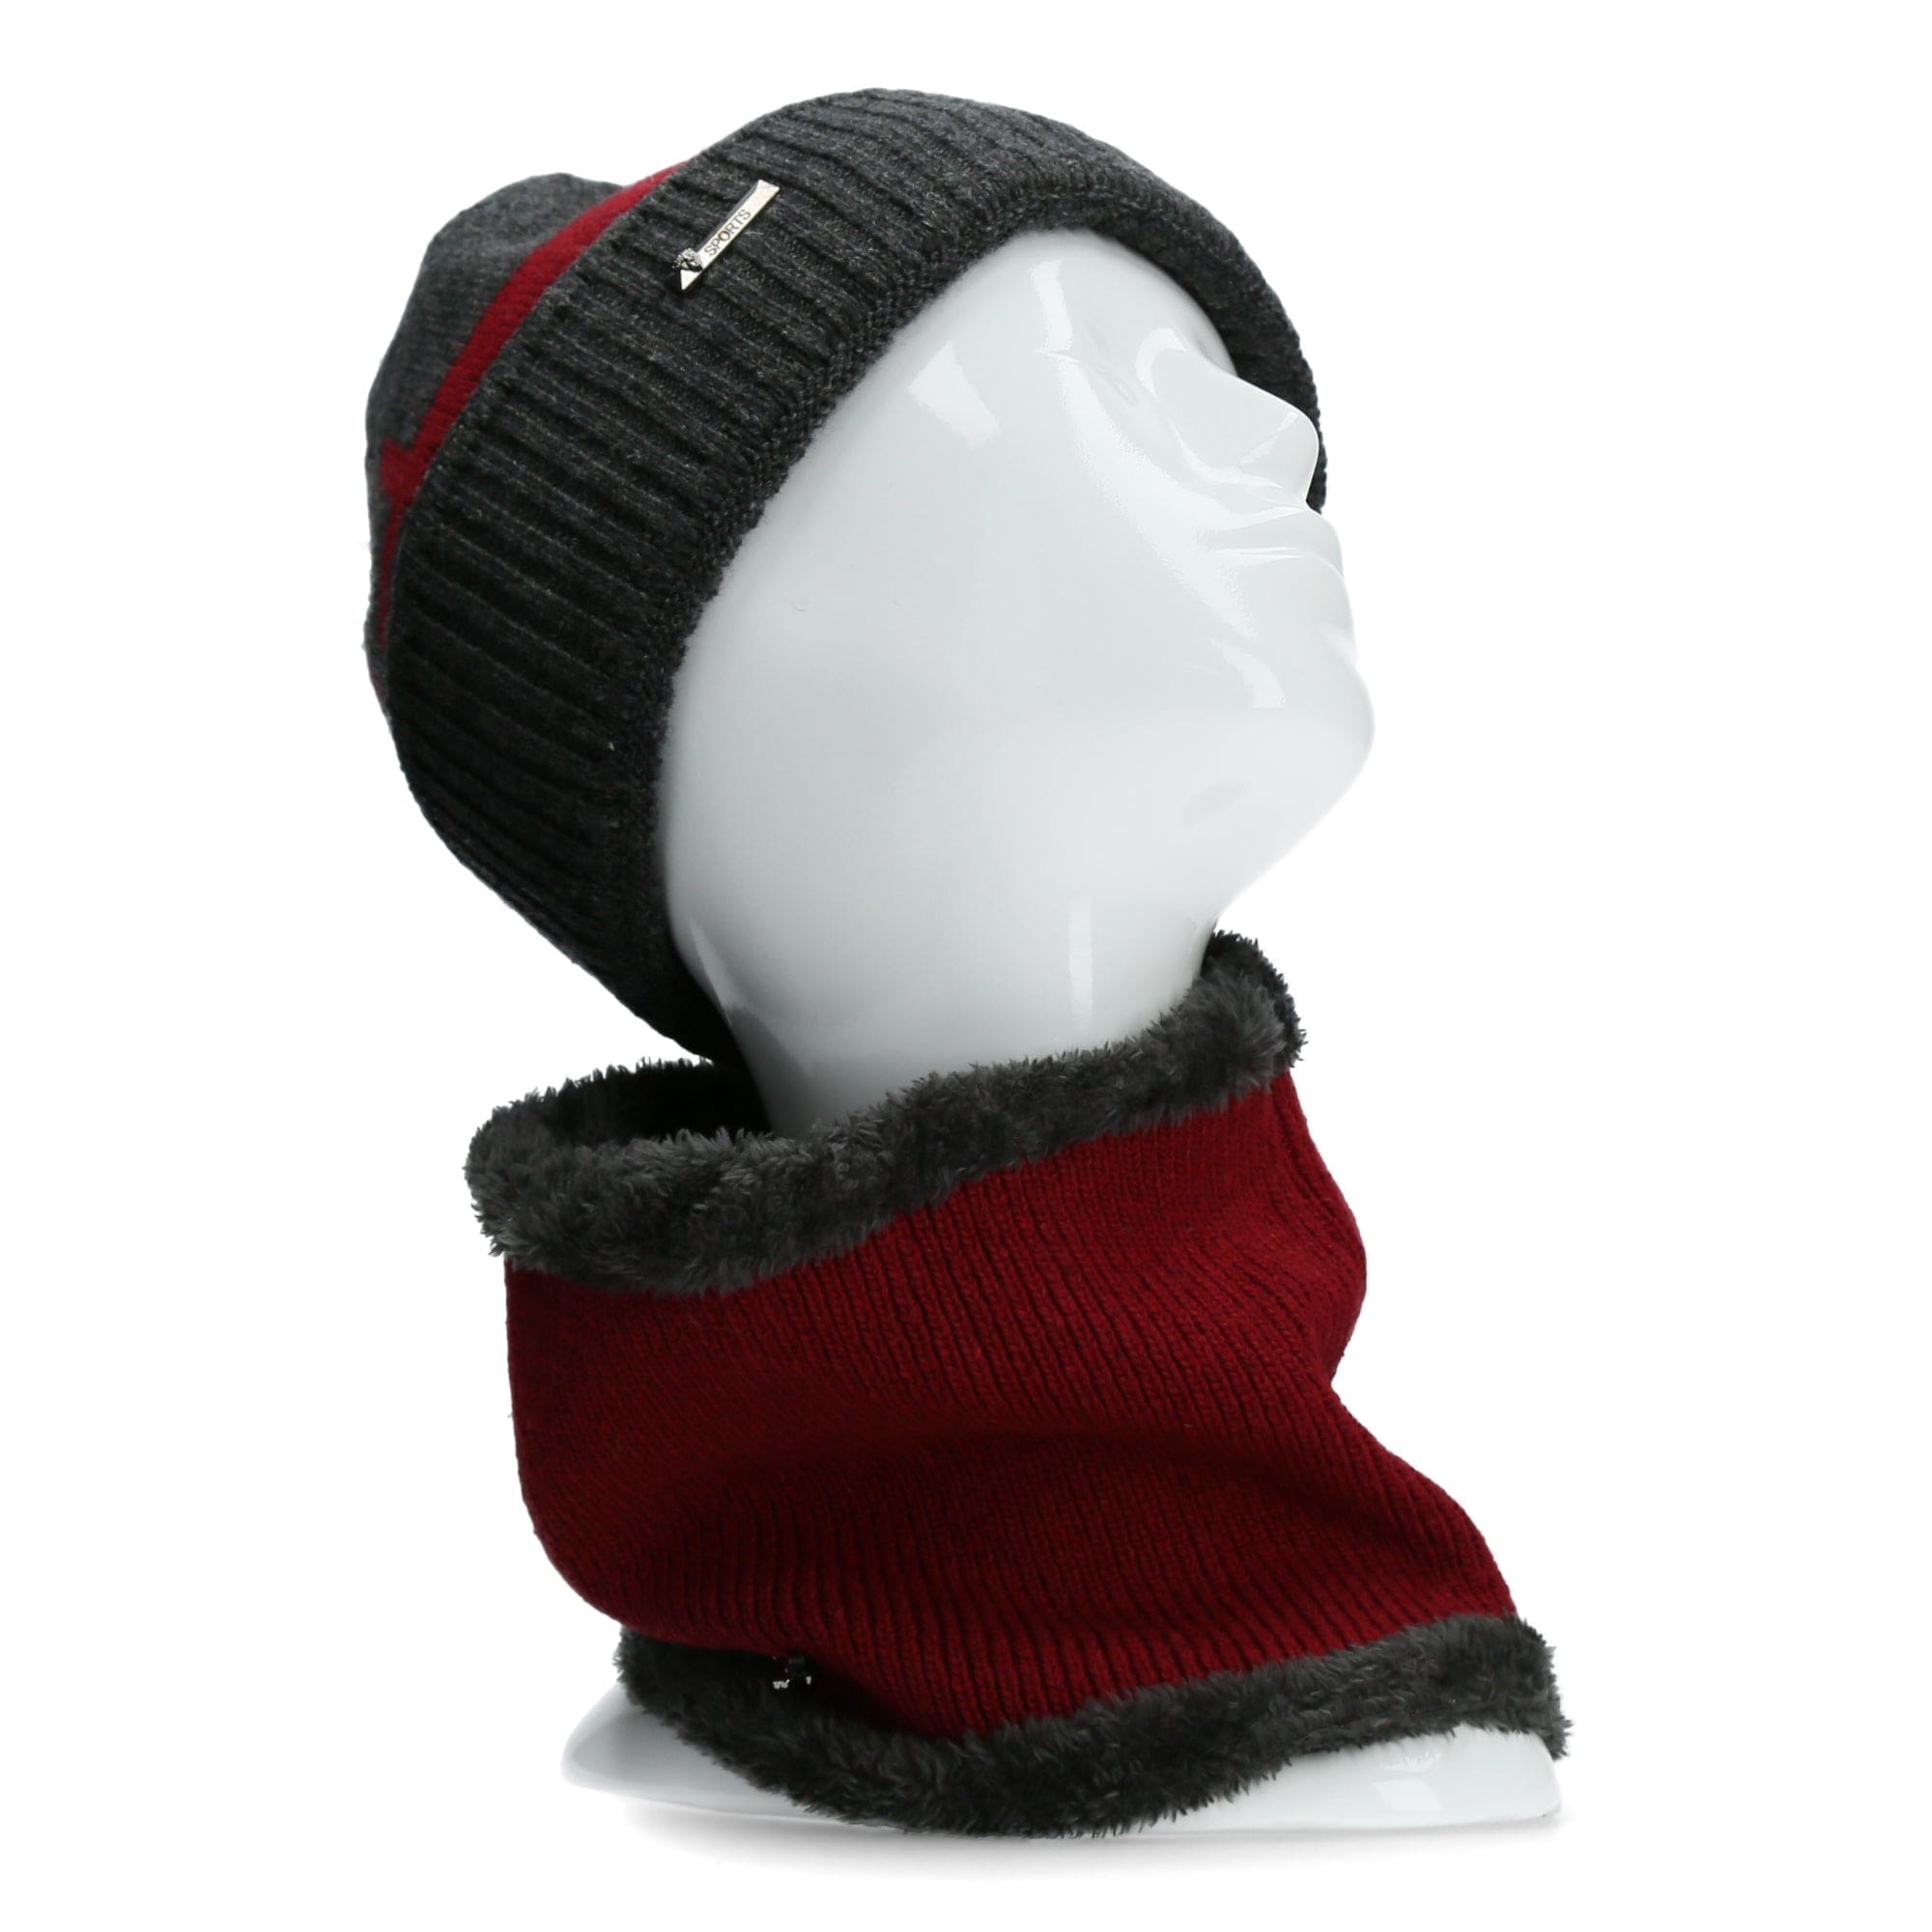 Duo beanie and neck warmer - Red - Hats